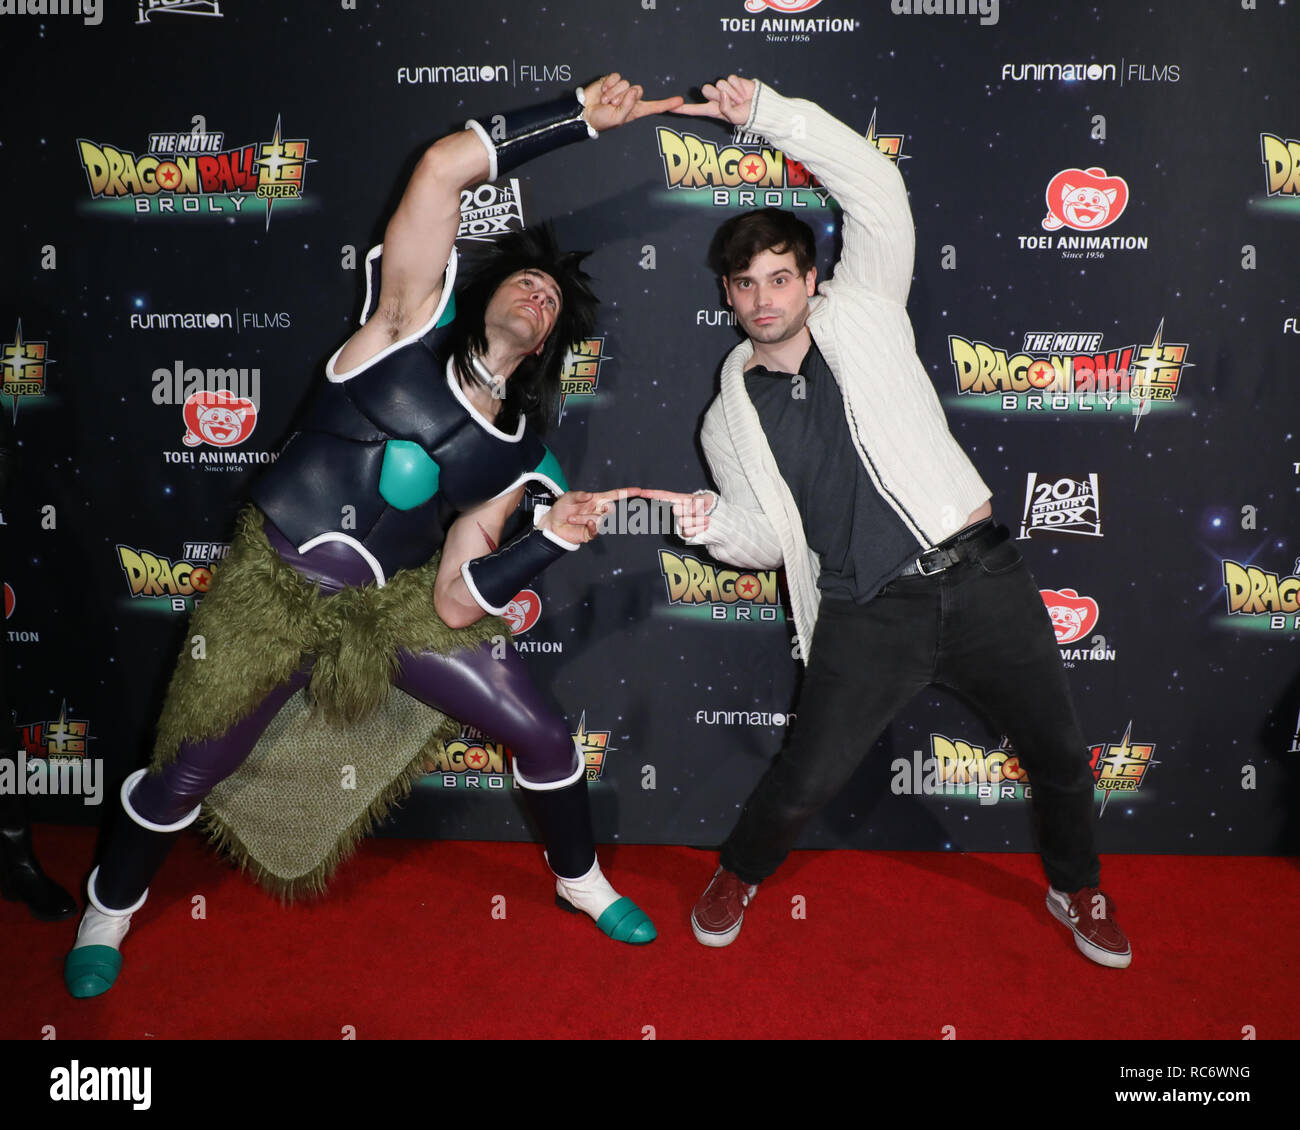 Funimation Films' 'Dragon Ball Super: Broly' Movie Premiere held at the TCL Chinese Theatre in Los Angeles, California on December 13, 2018  Featuring: Alexander Drastal, Damien Haas Where: Los Angeles, California, United States When: 13 Dec 2018 Credit: Sheri Determan/WENN.com Stock Photo